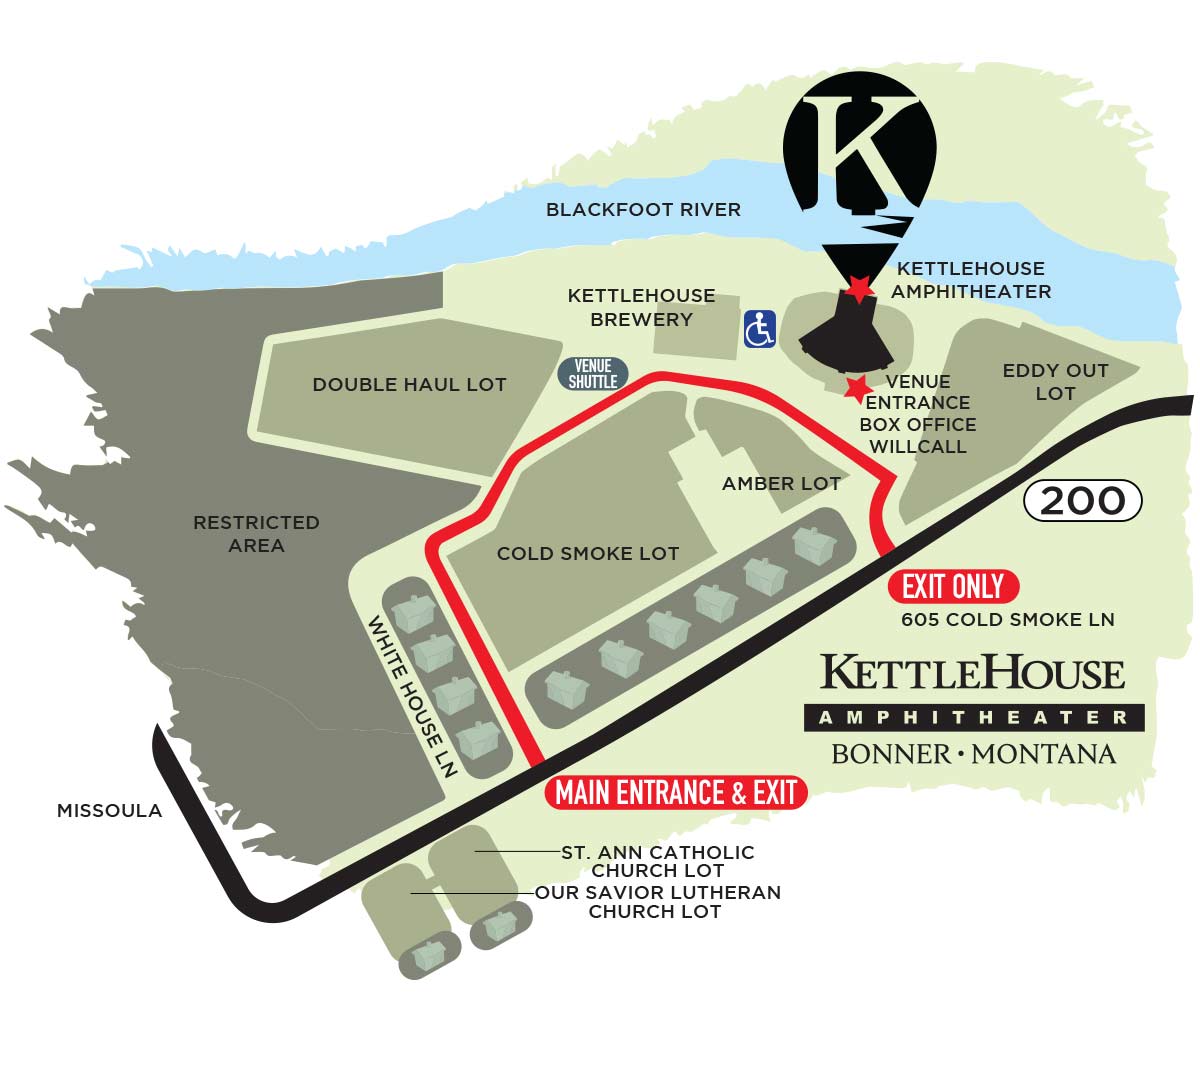 KettleHouse Amphitheater map of parking, shuttles and where to enter and exit